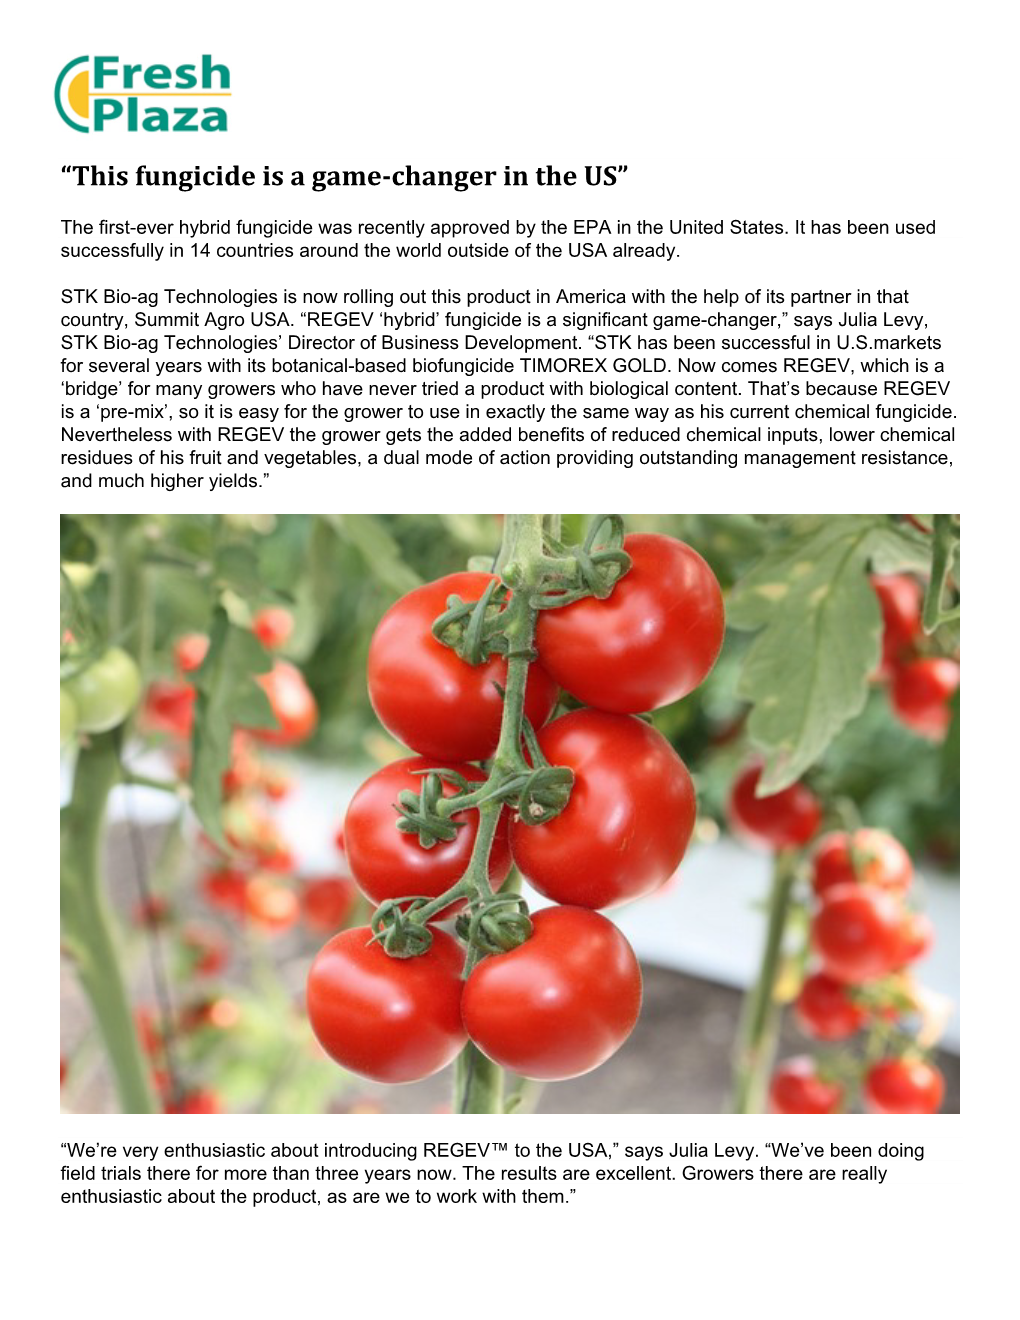 “This Fungicide Is a Game-Changer in the US”